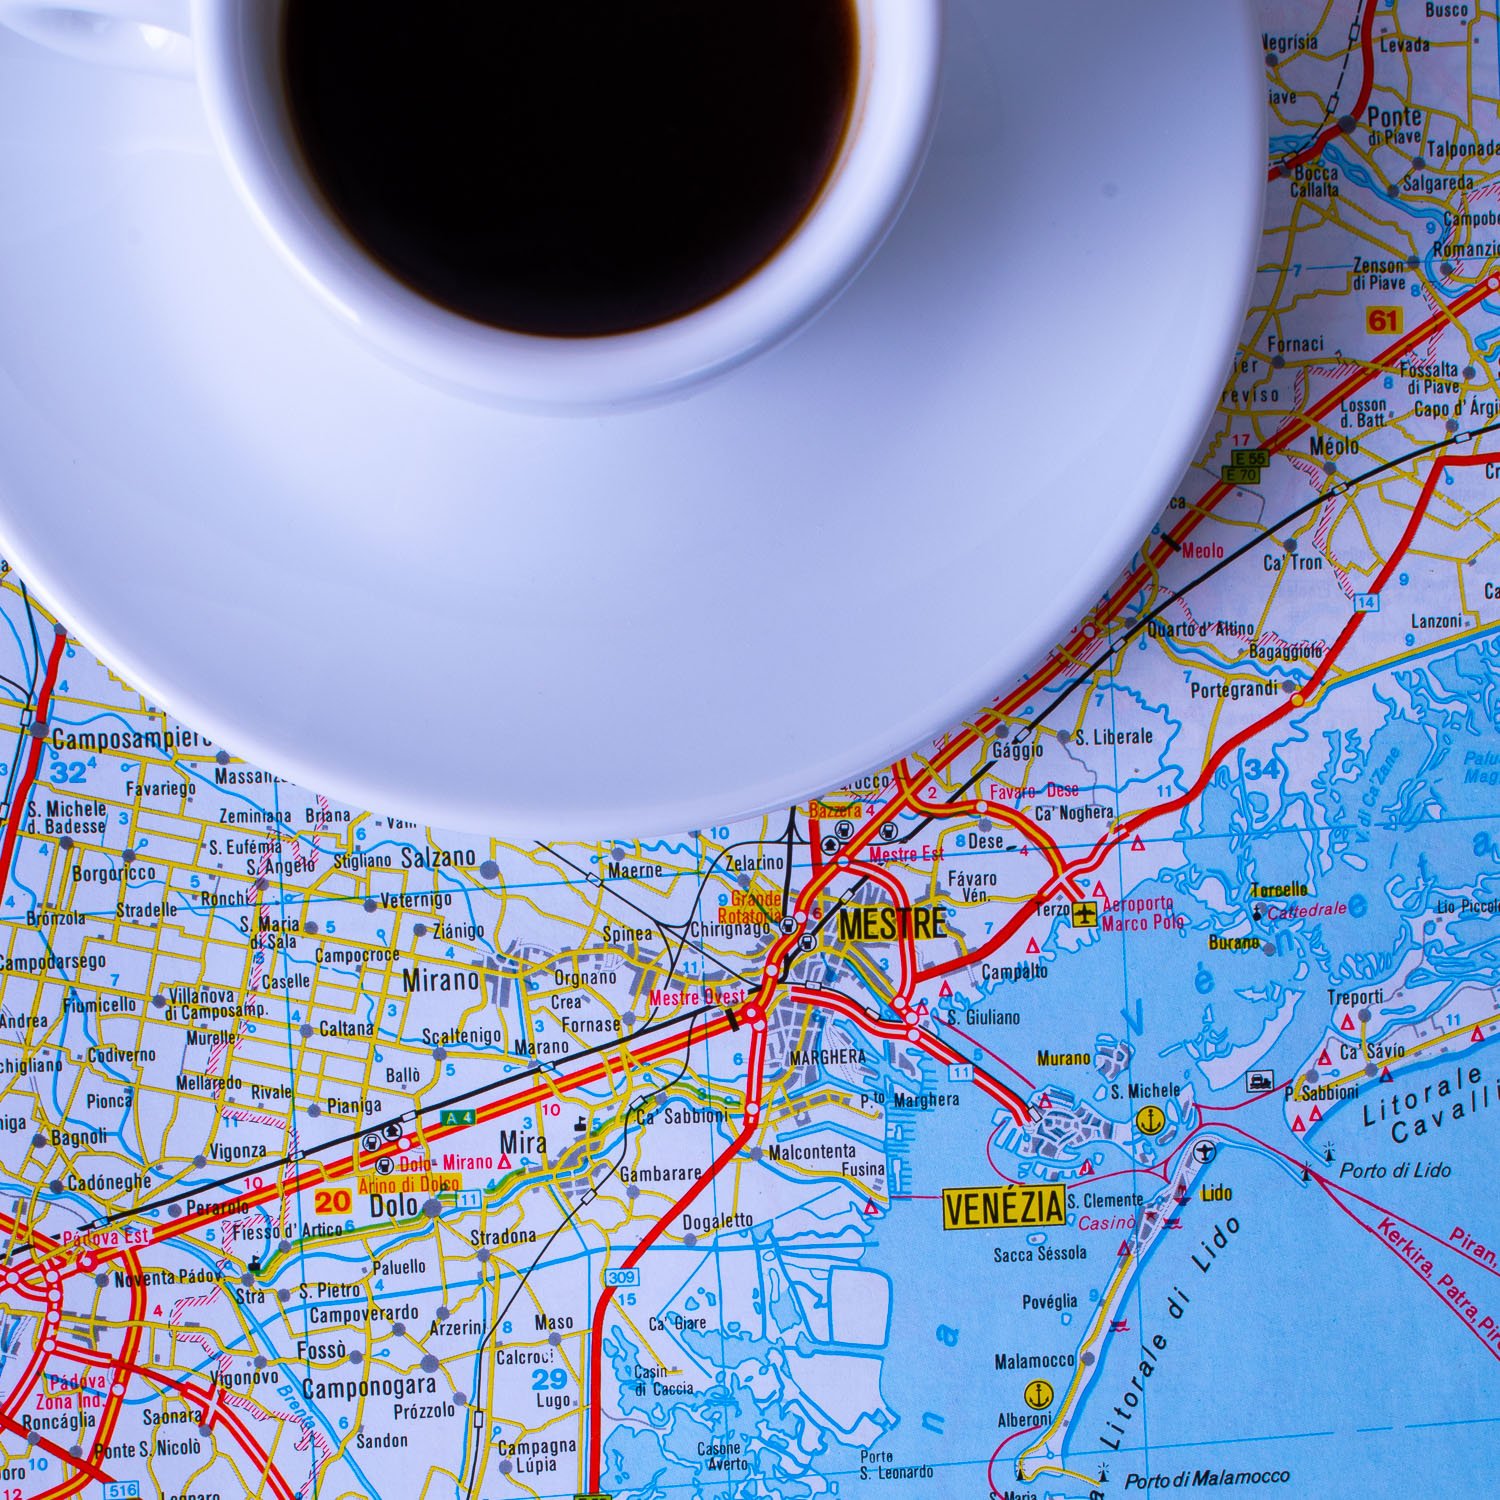 Italian Coffee Culture - Coffee And A Map